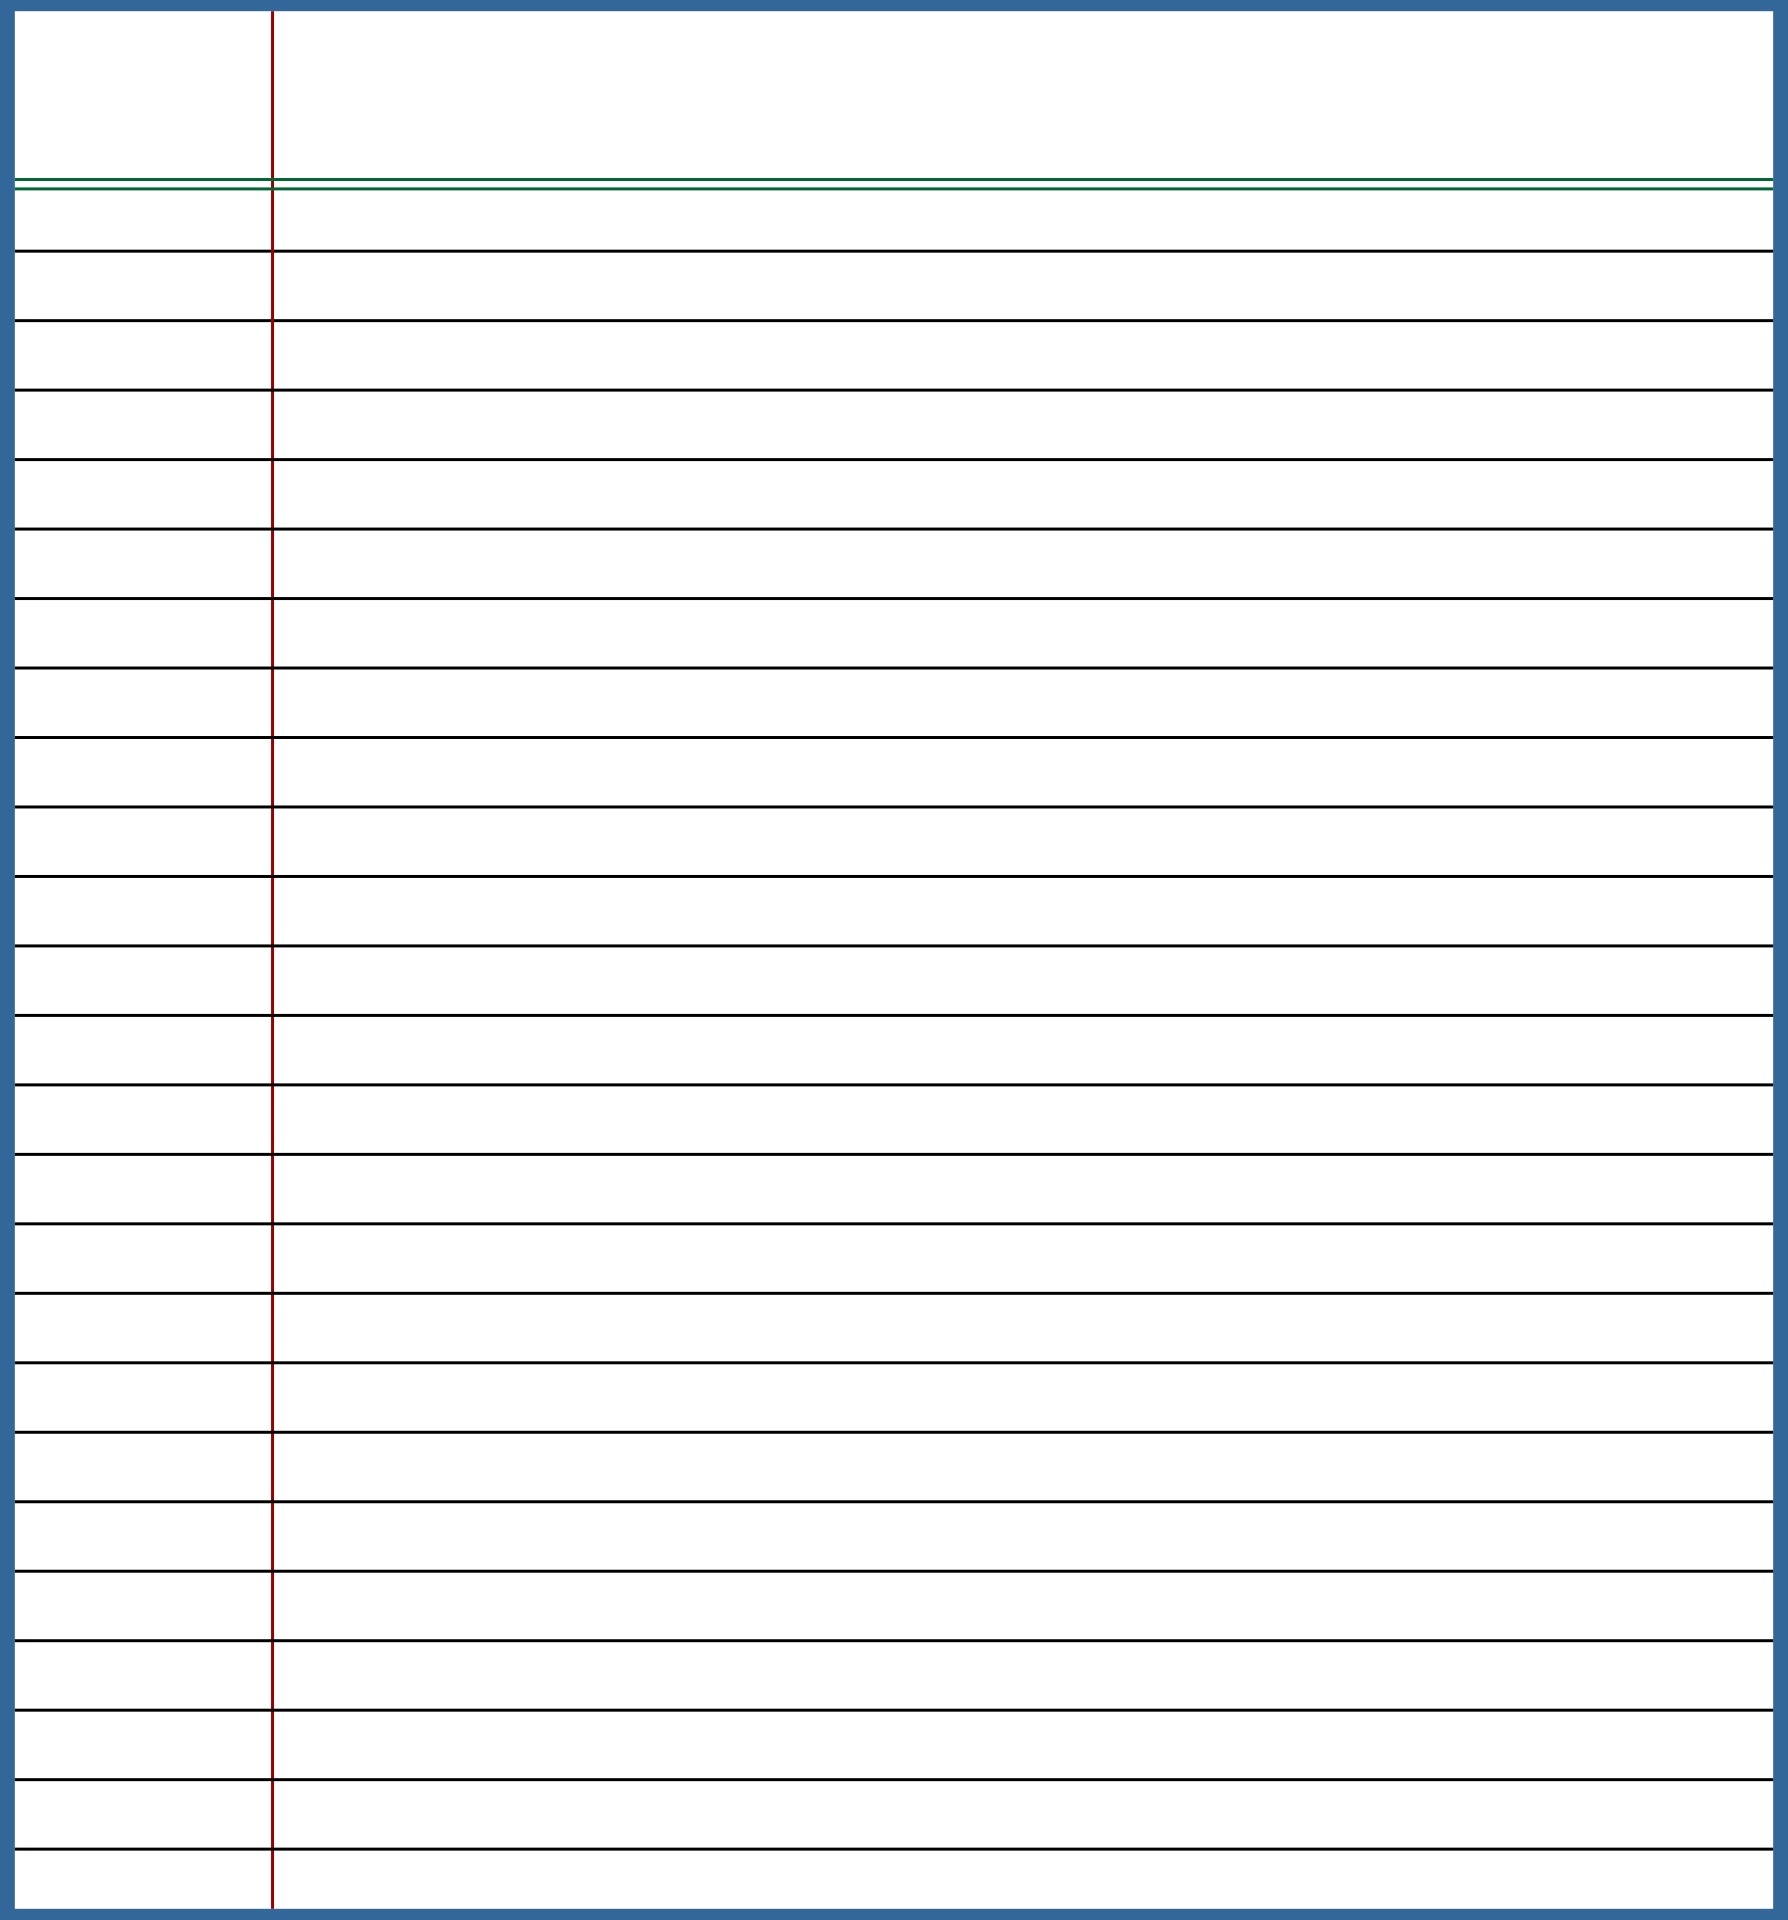 10 Best Standard Printable Lined Writing Paper - Printablee intended for Ruled Paper Template Word